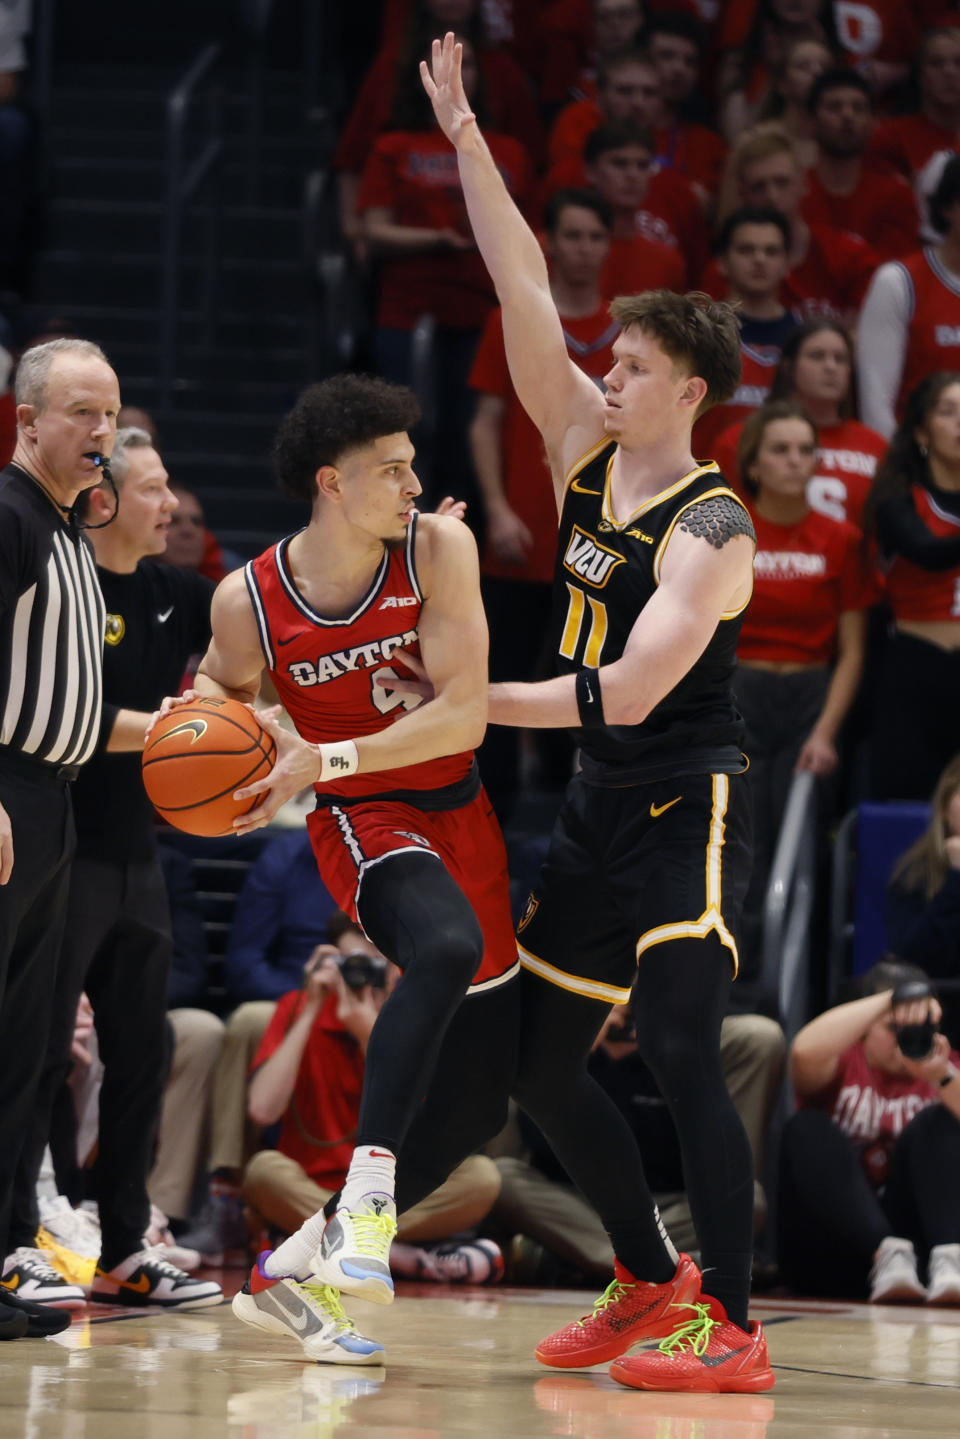 Dayton's Koby Brea (4) looks for an open pass as Virginia Commonwealth's Max Shulga, right, defends during the first half of an NCAA college basketball game Friday, March 8, 2024, in Dayton, Ohio. (AP Photo/Jay LaPrete)